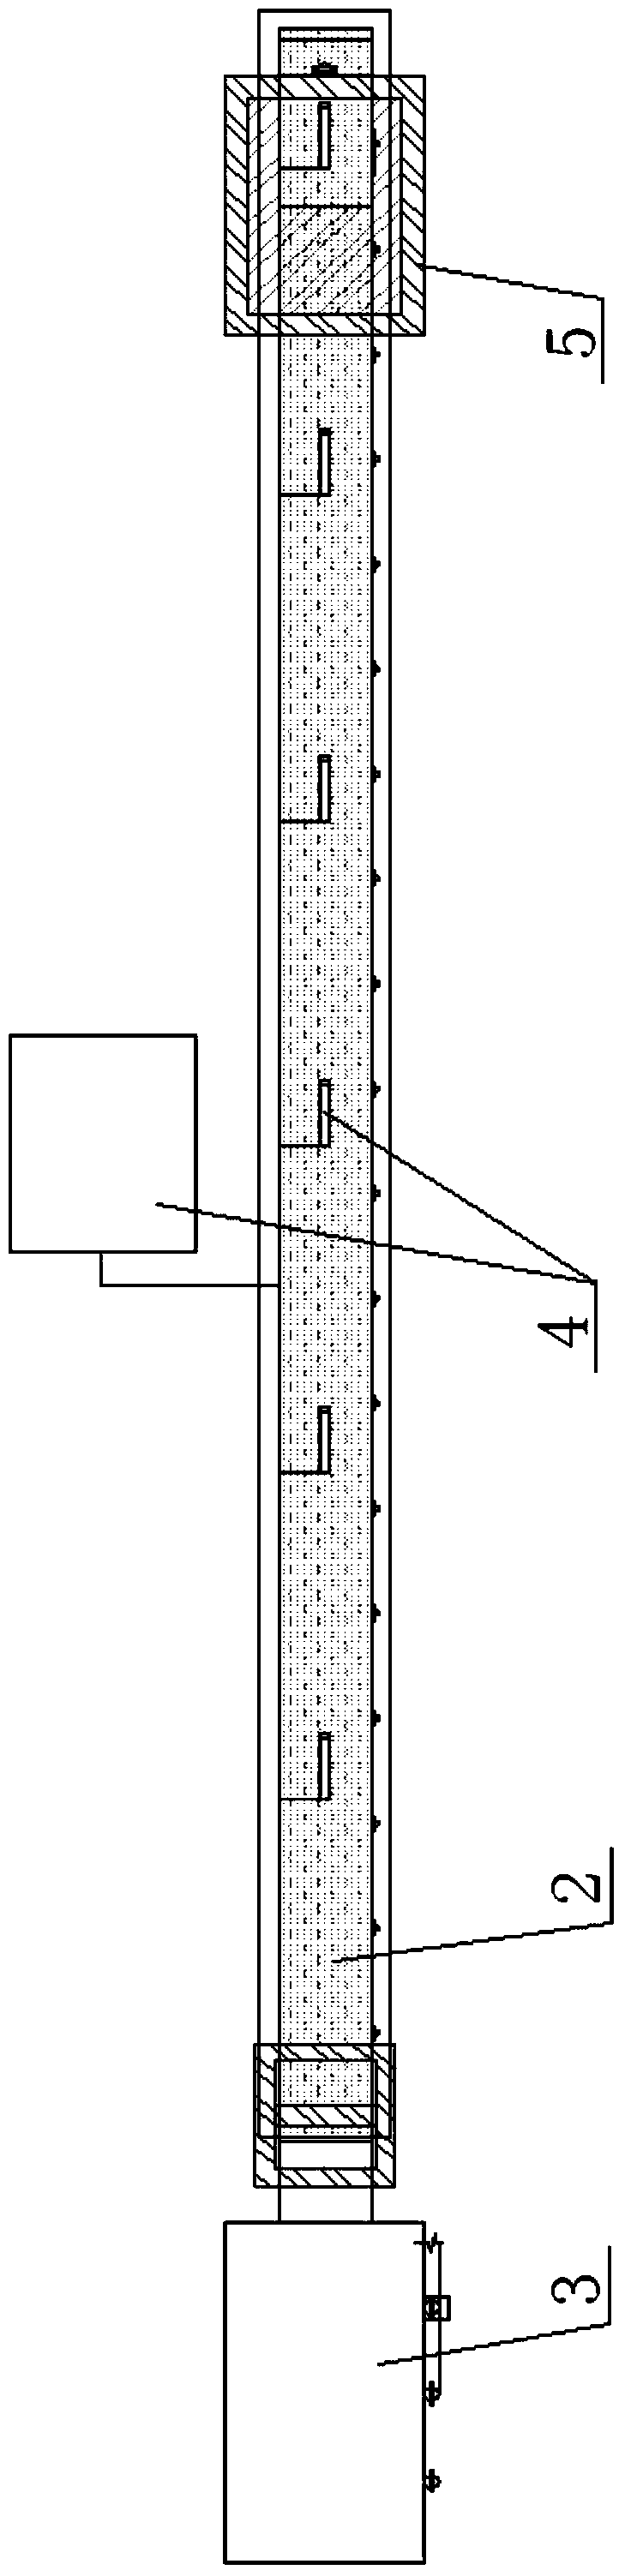 Physical model test apparatus for confined groundwater in bedding bank slope